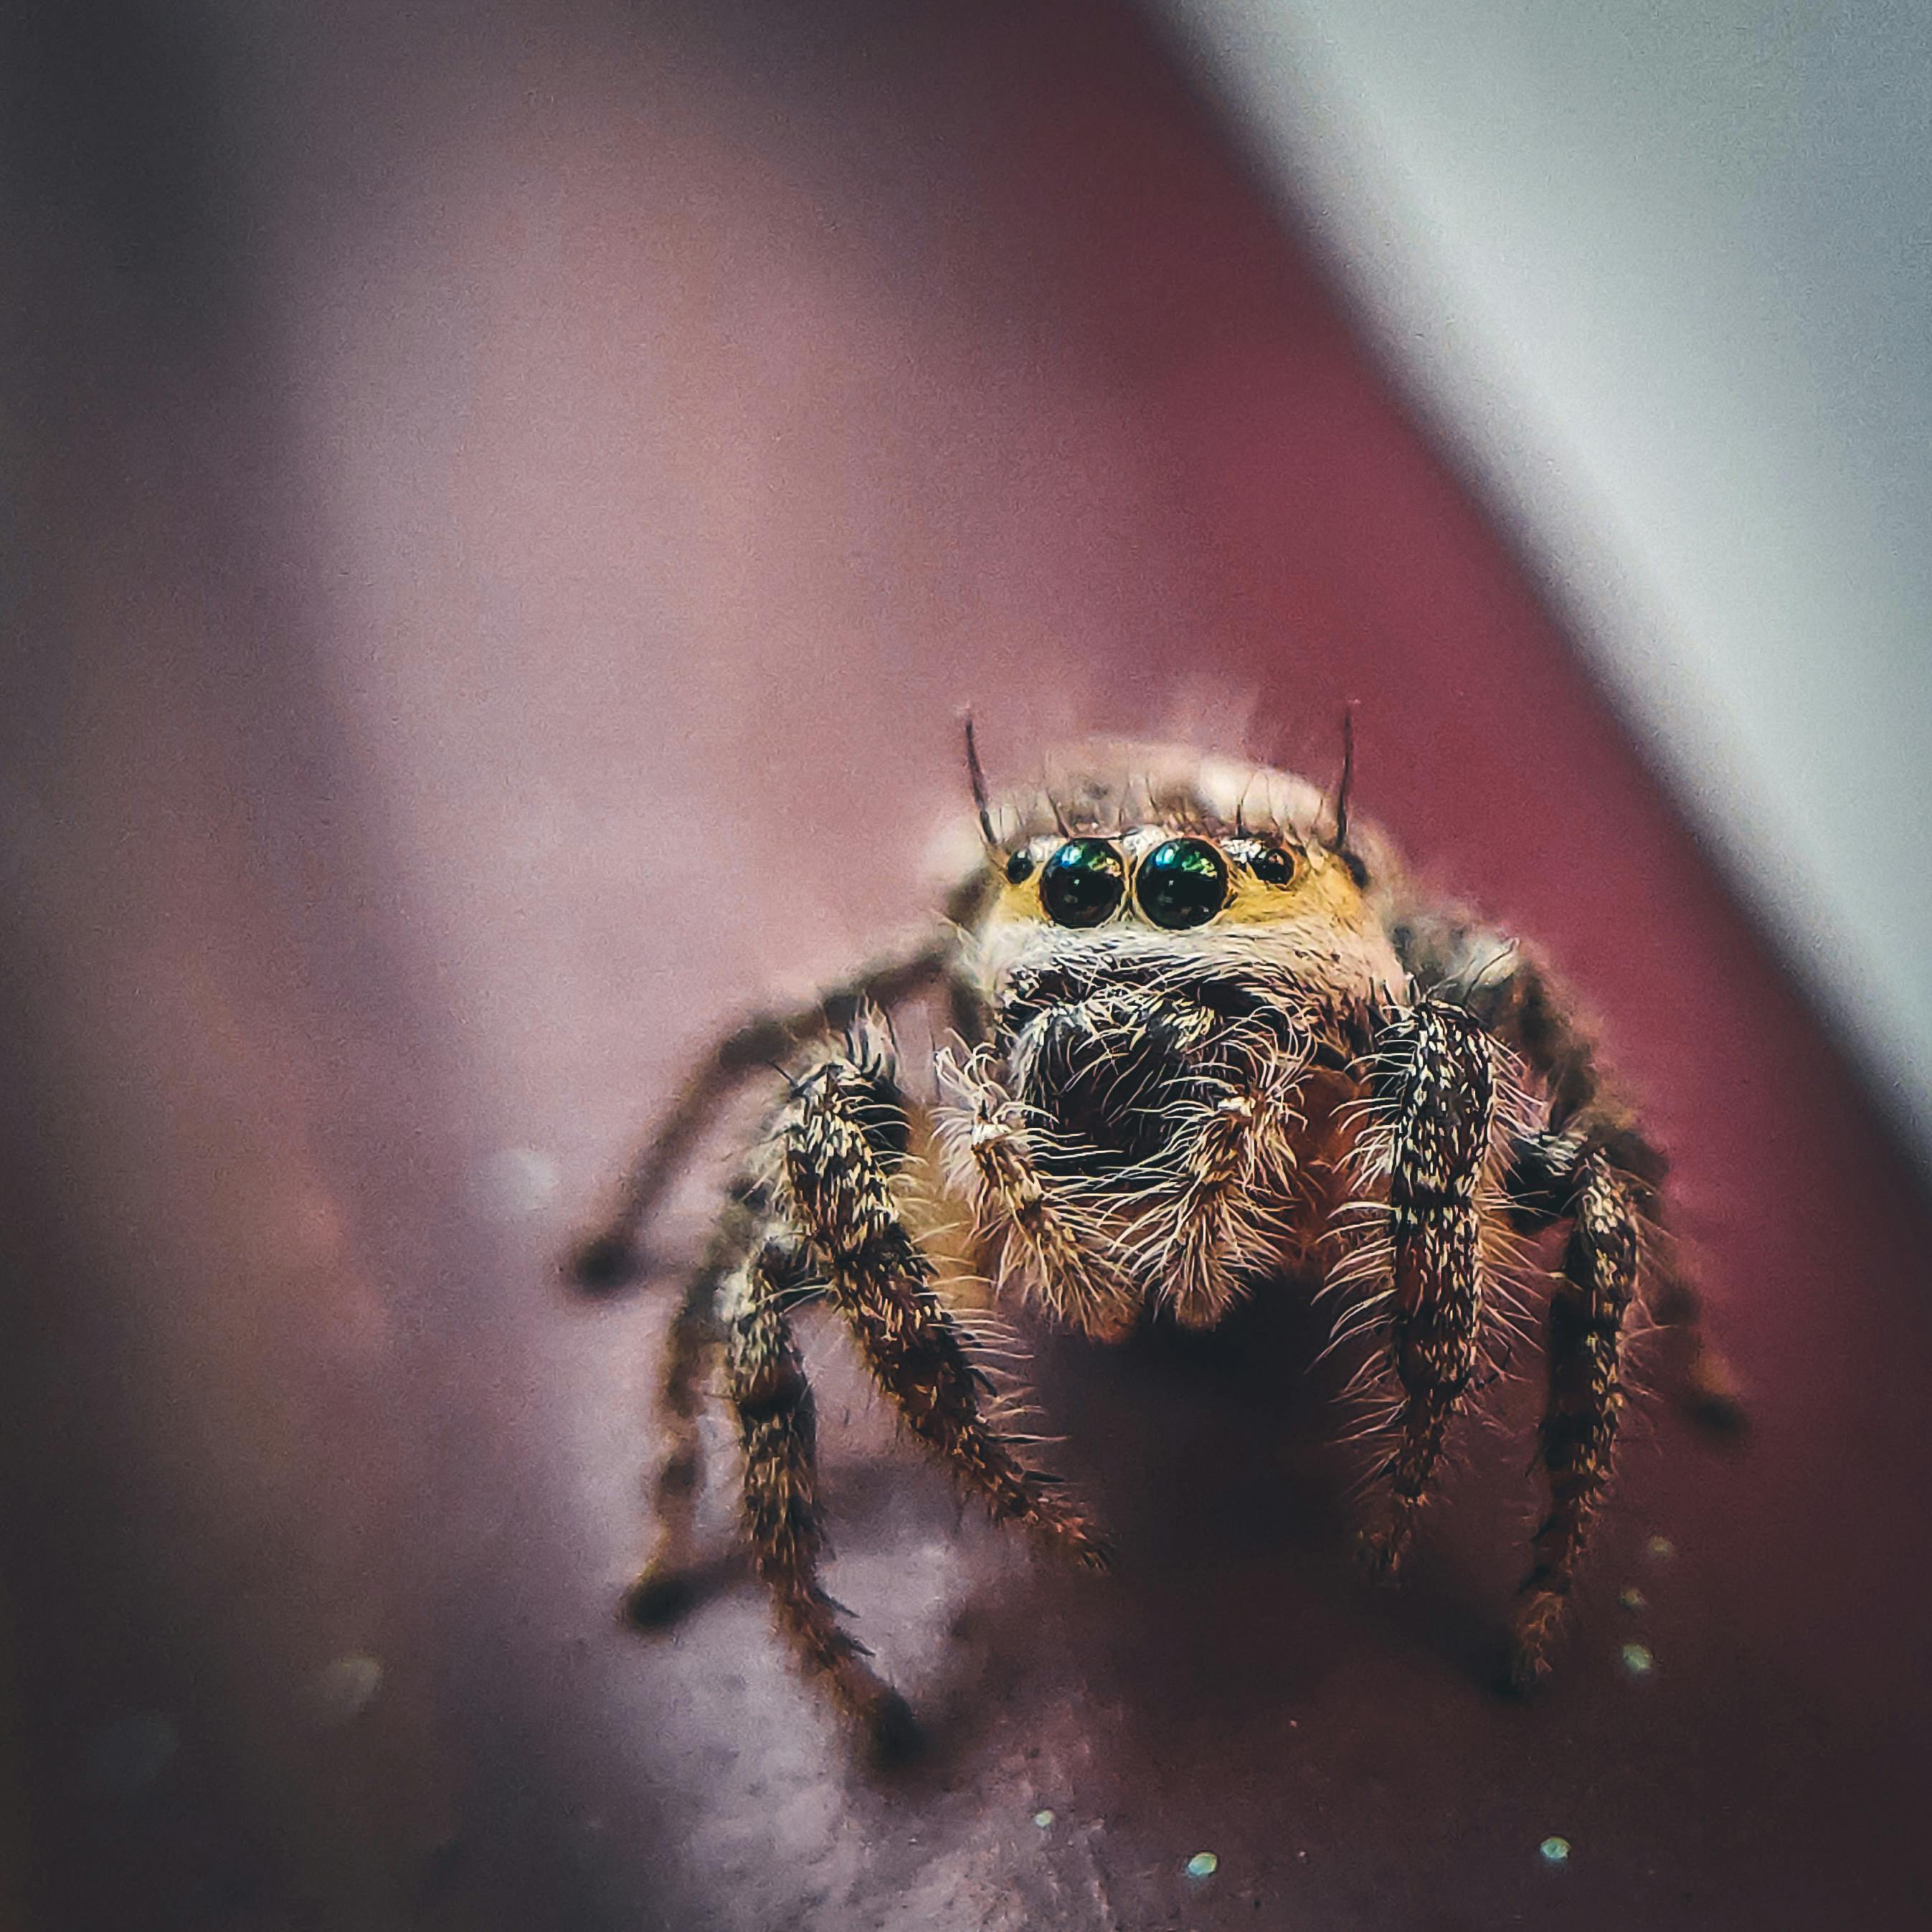  close  up  photo of a spider   Free Stock Photo